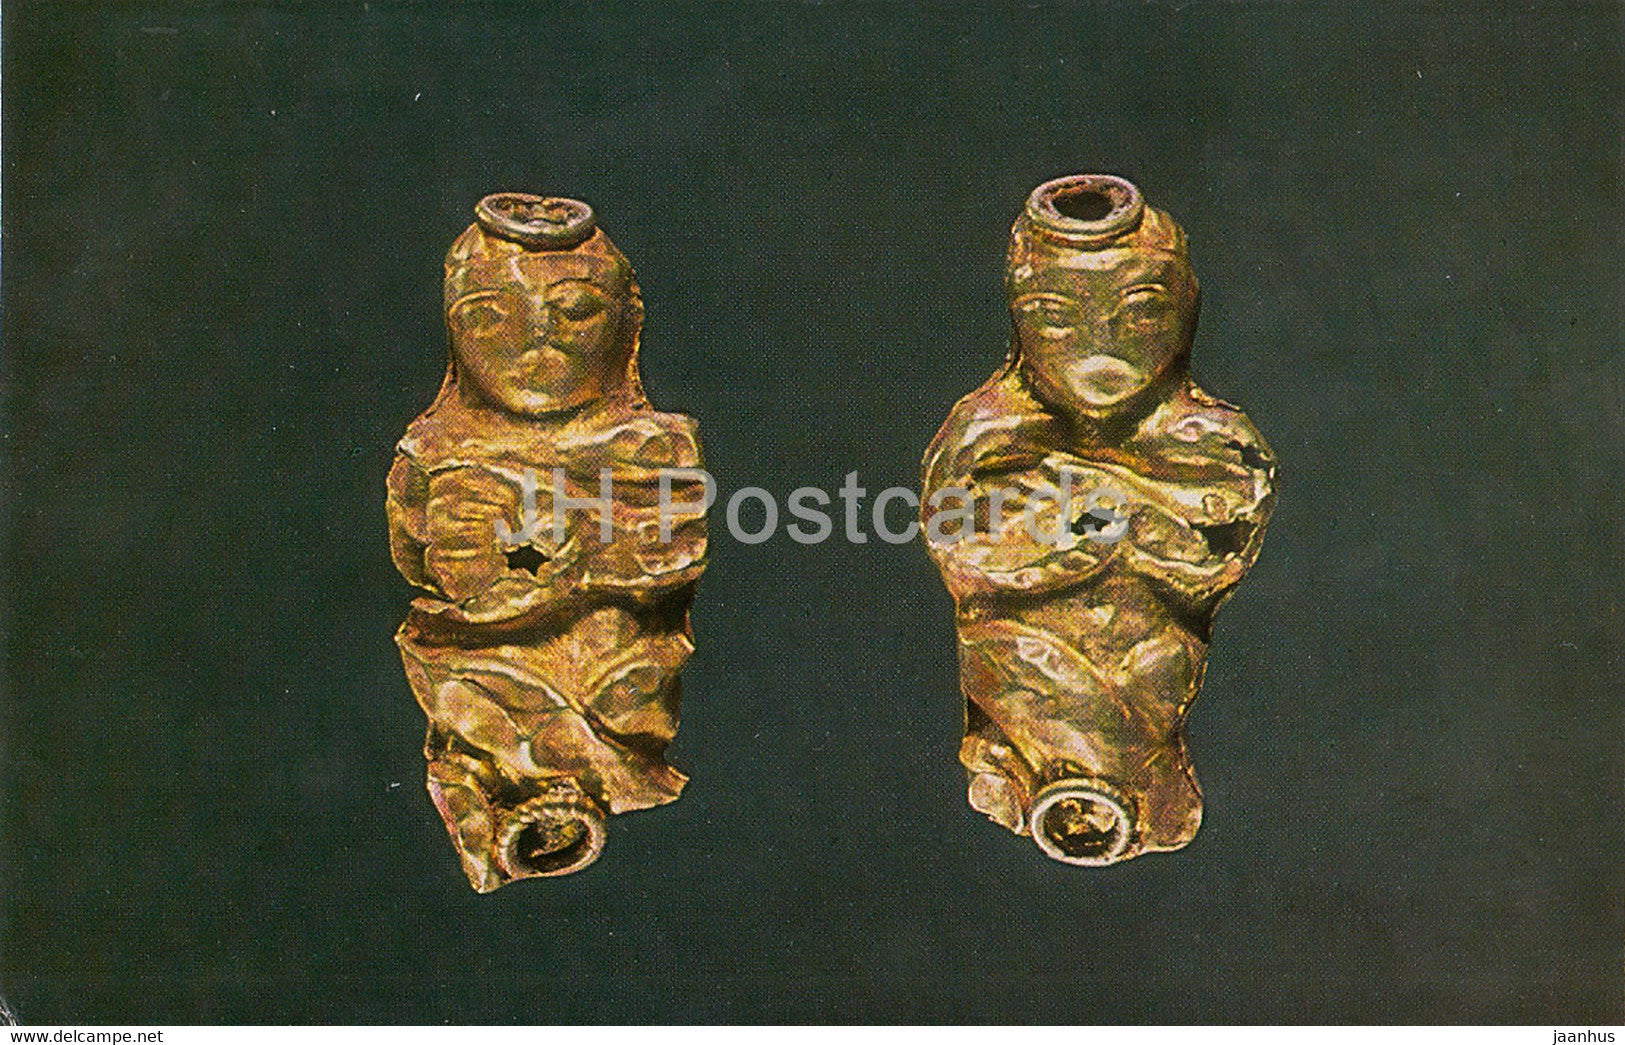 Statuettes of Musicians - National Museum of Afghanistan - archaeology - Bactrian Gold - 1984 - USSR Russia - used - JH Postcards